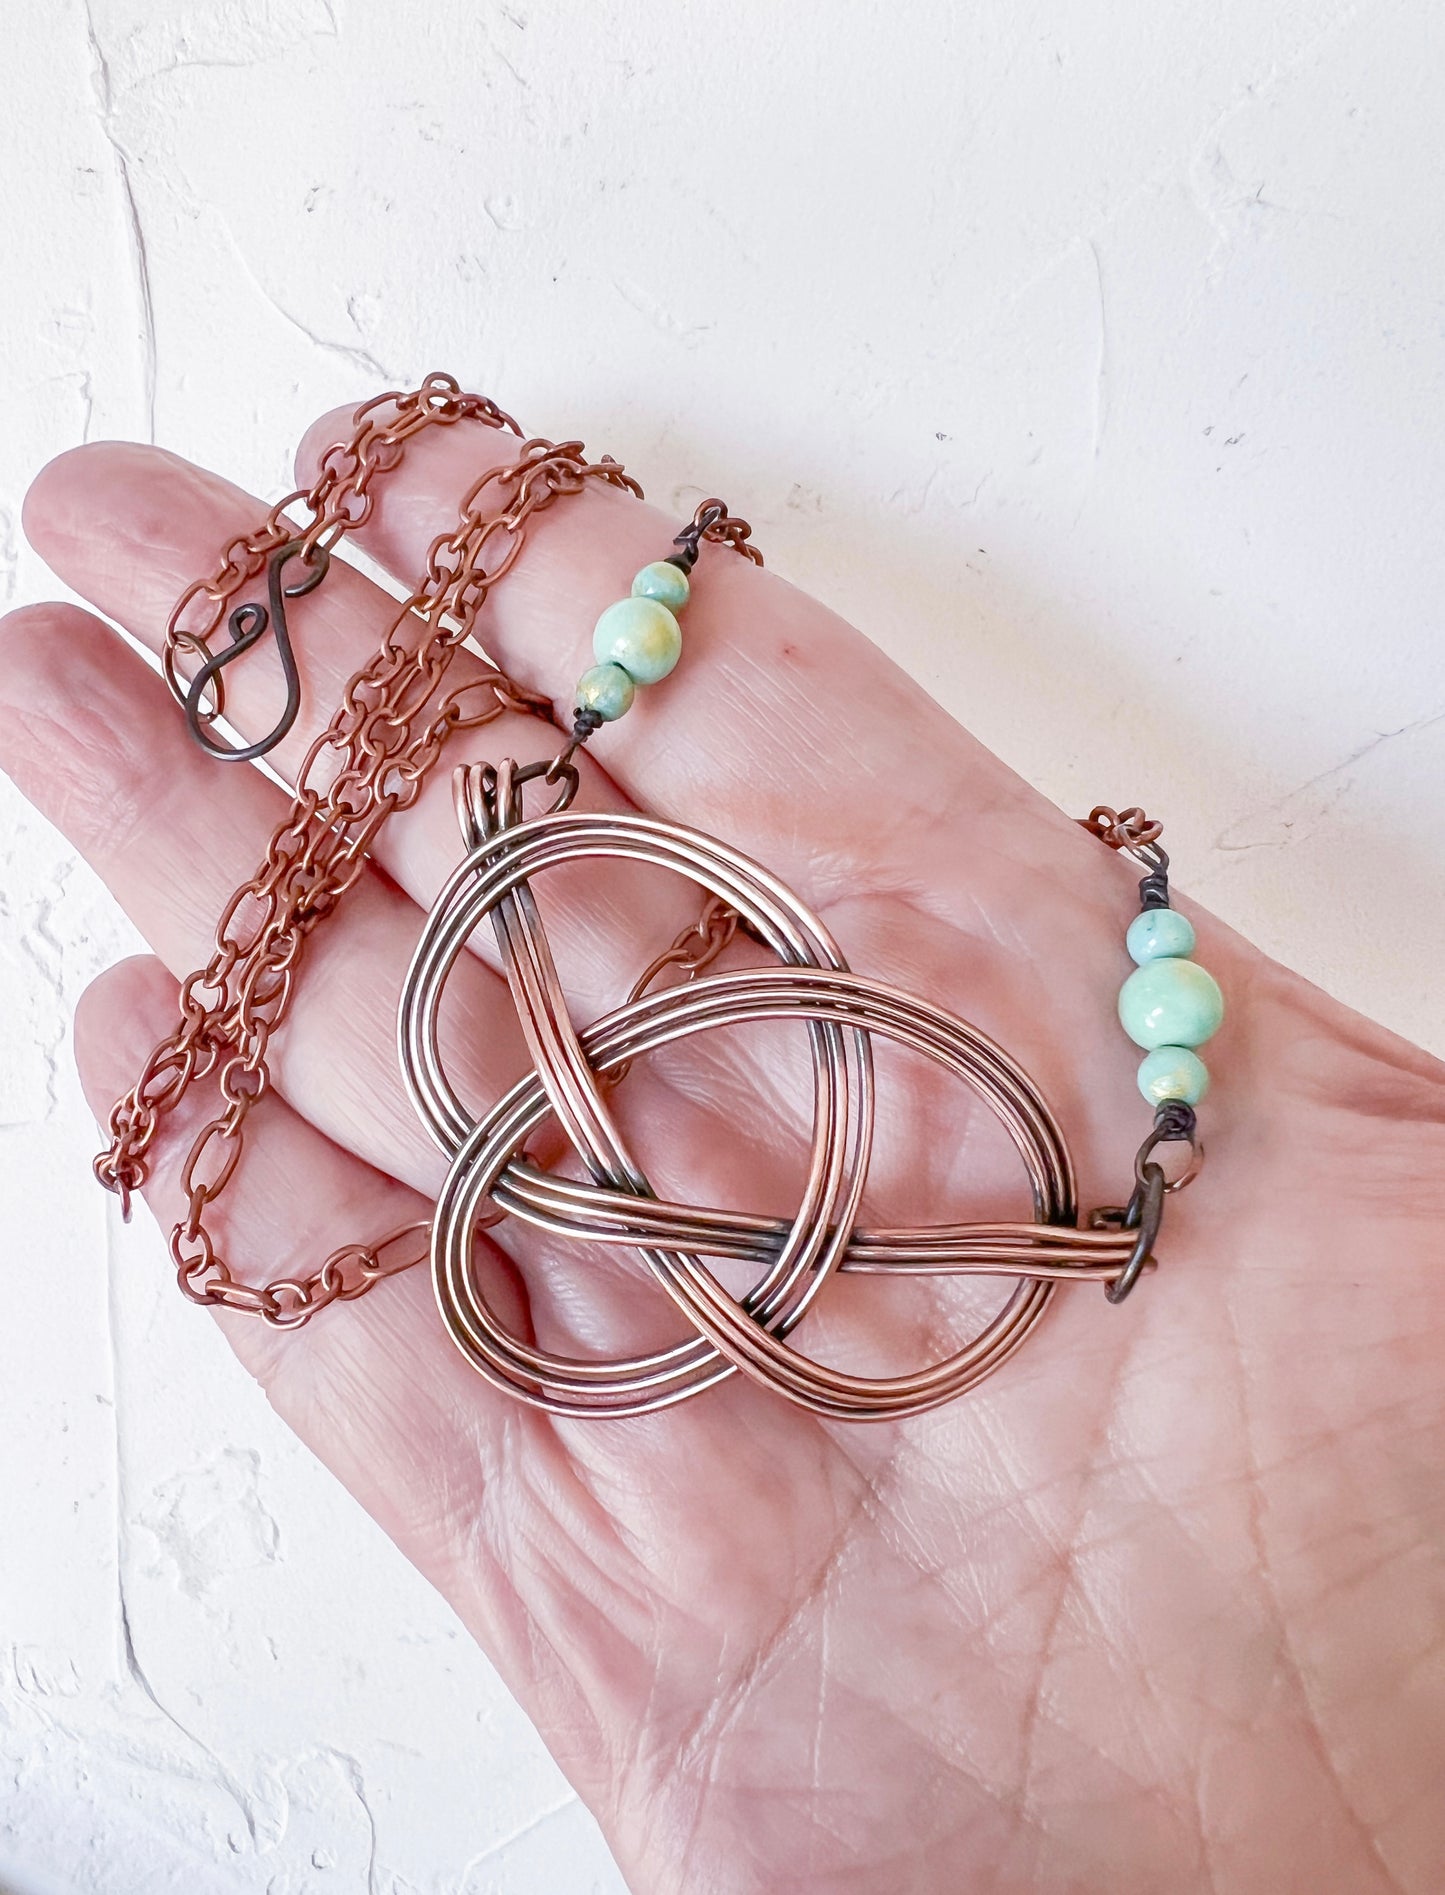 Celtic Knot in Copper with Jade Accent Beads